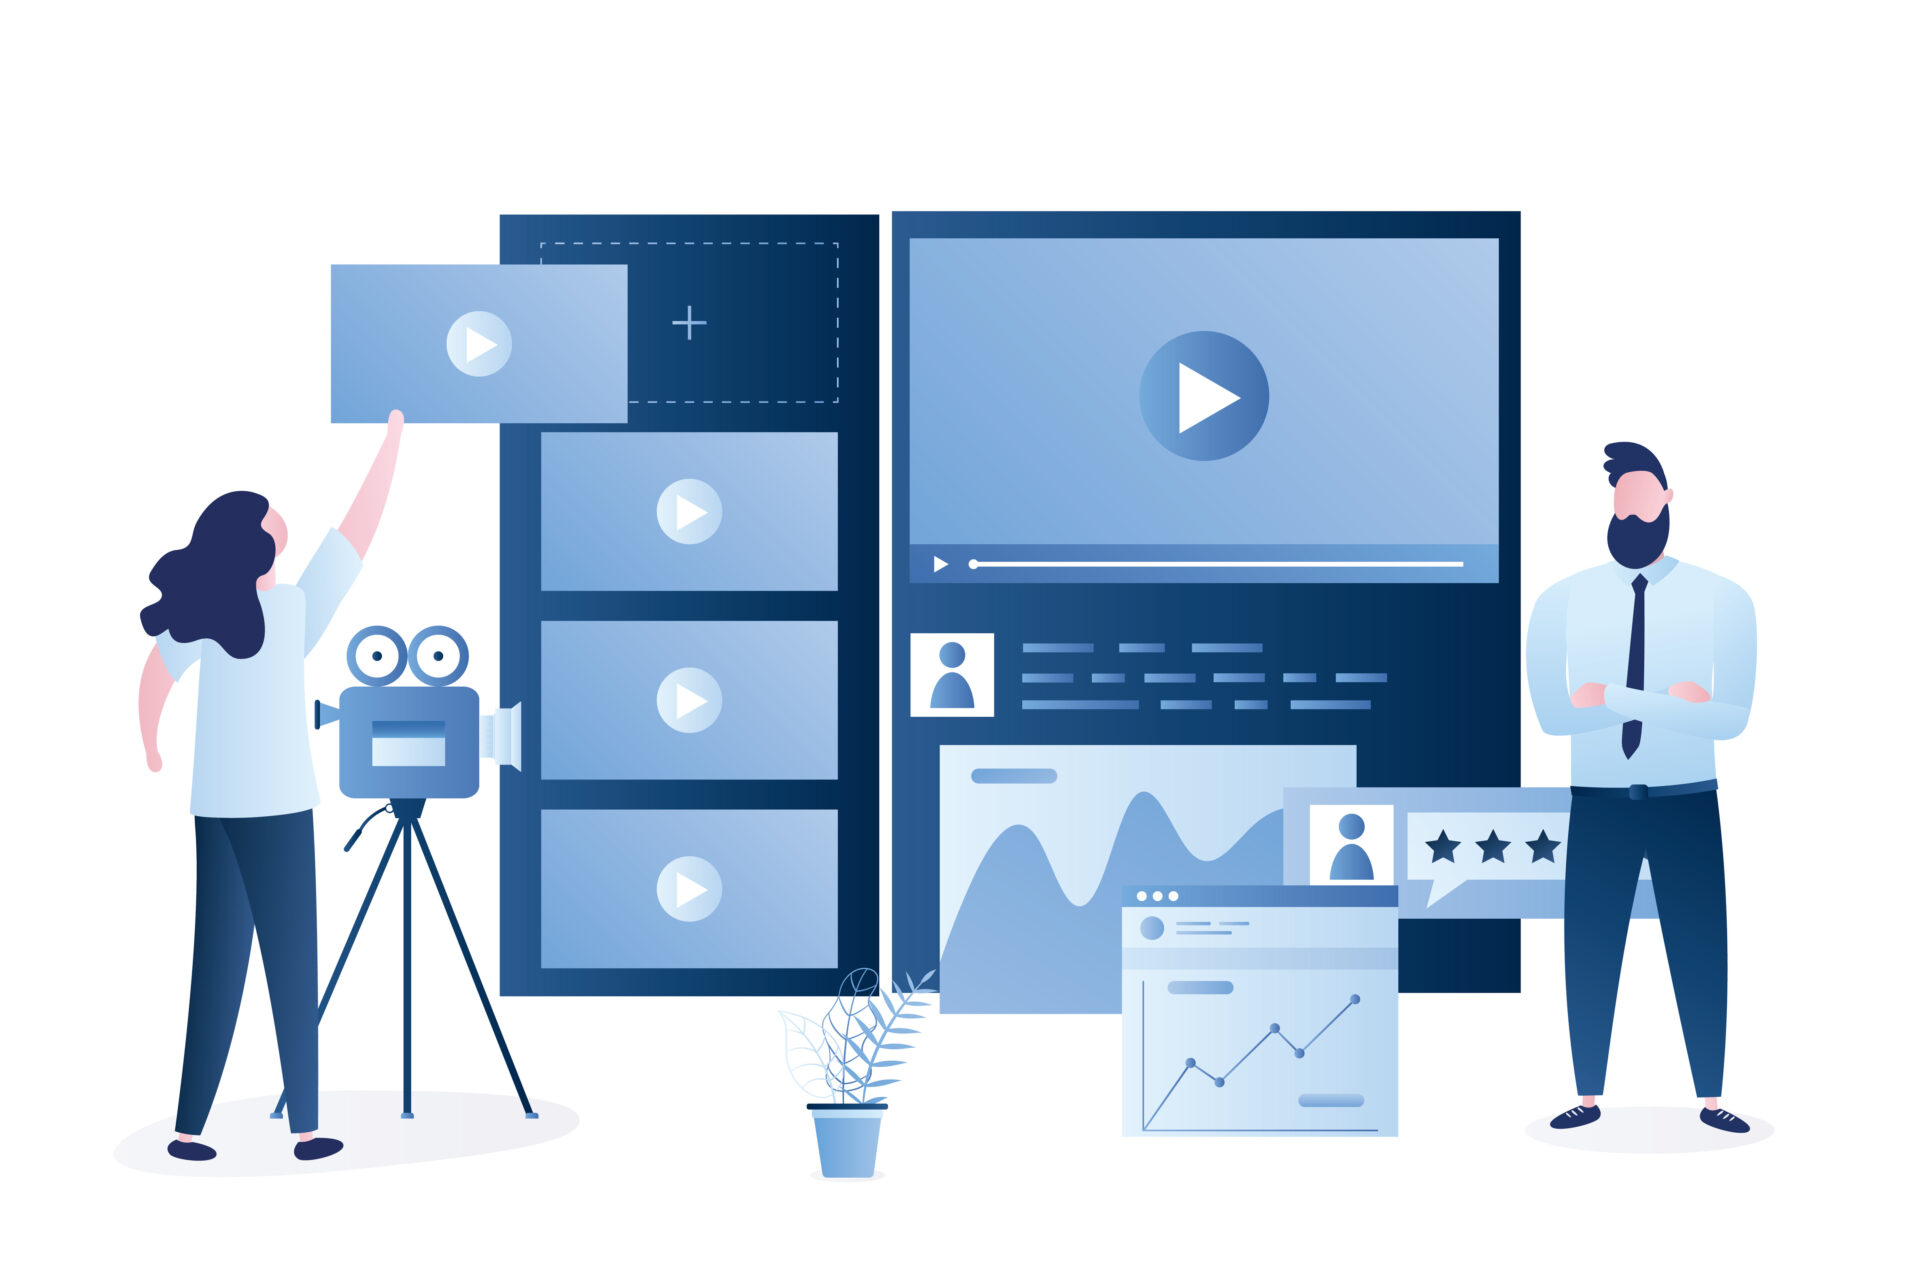 Video marketing platform. Video creation tools, start an engaging B2B online marketing campaign. Analyzing and reporting key metrics. Businesspeople, webpage and signs in trendy style. Vector illustration